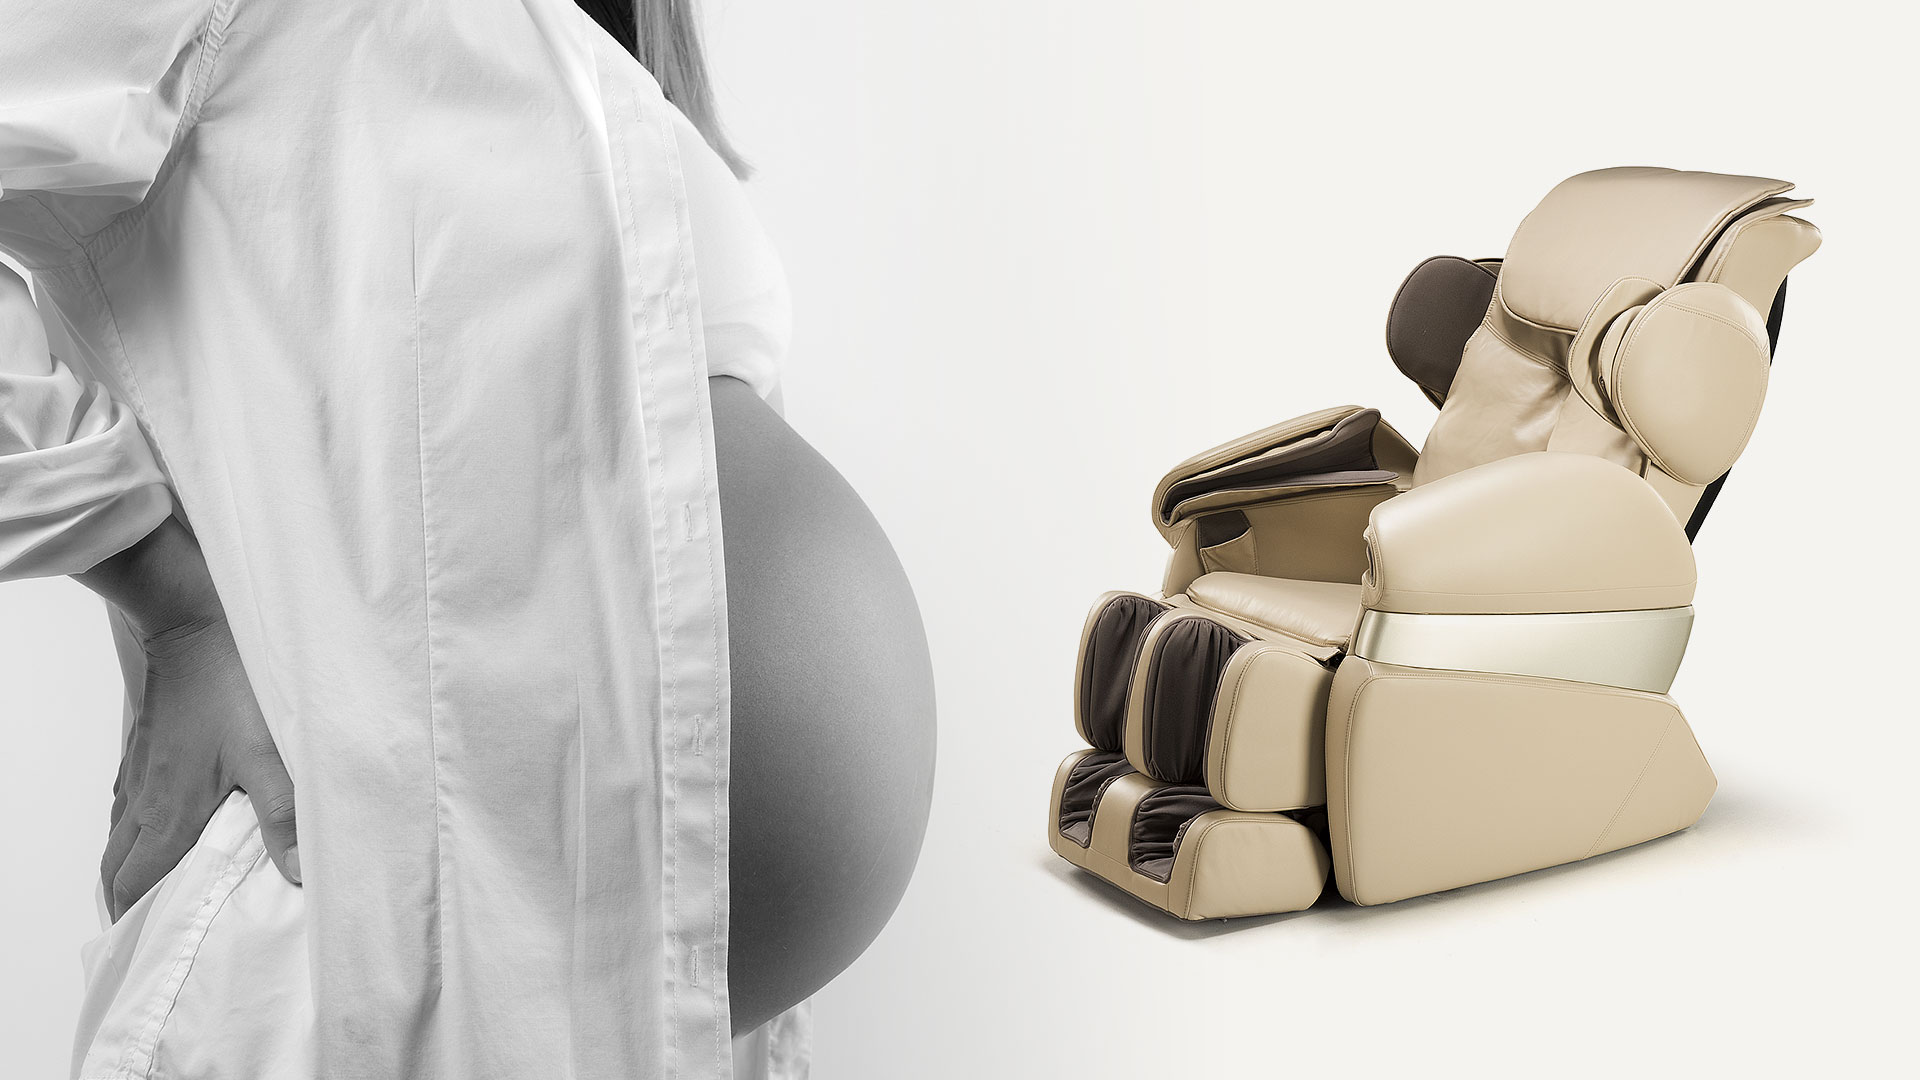 Massage chair and pregnancy  Rest Lords - massage chairs